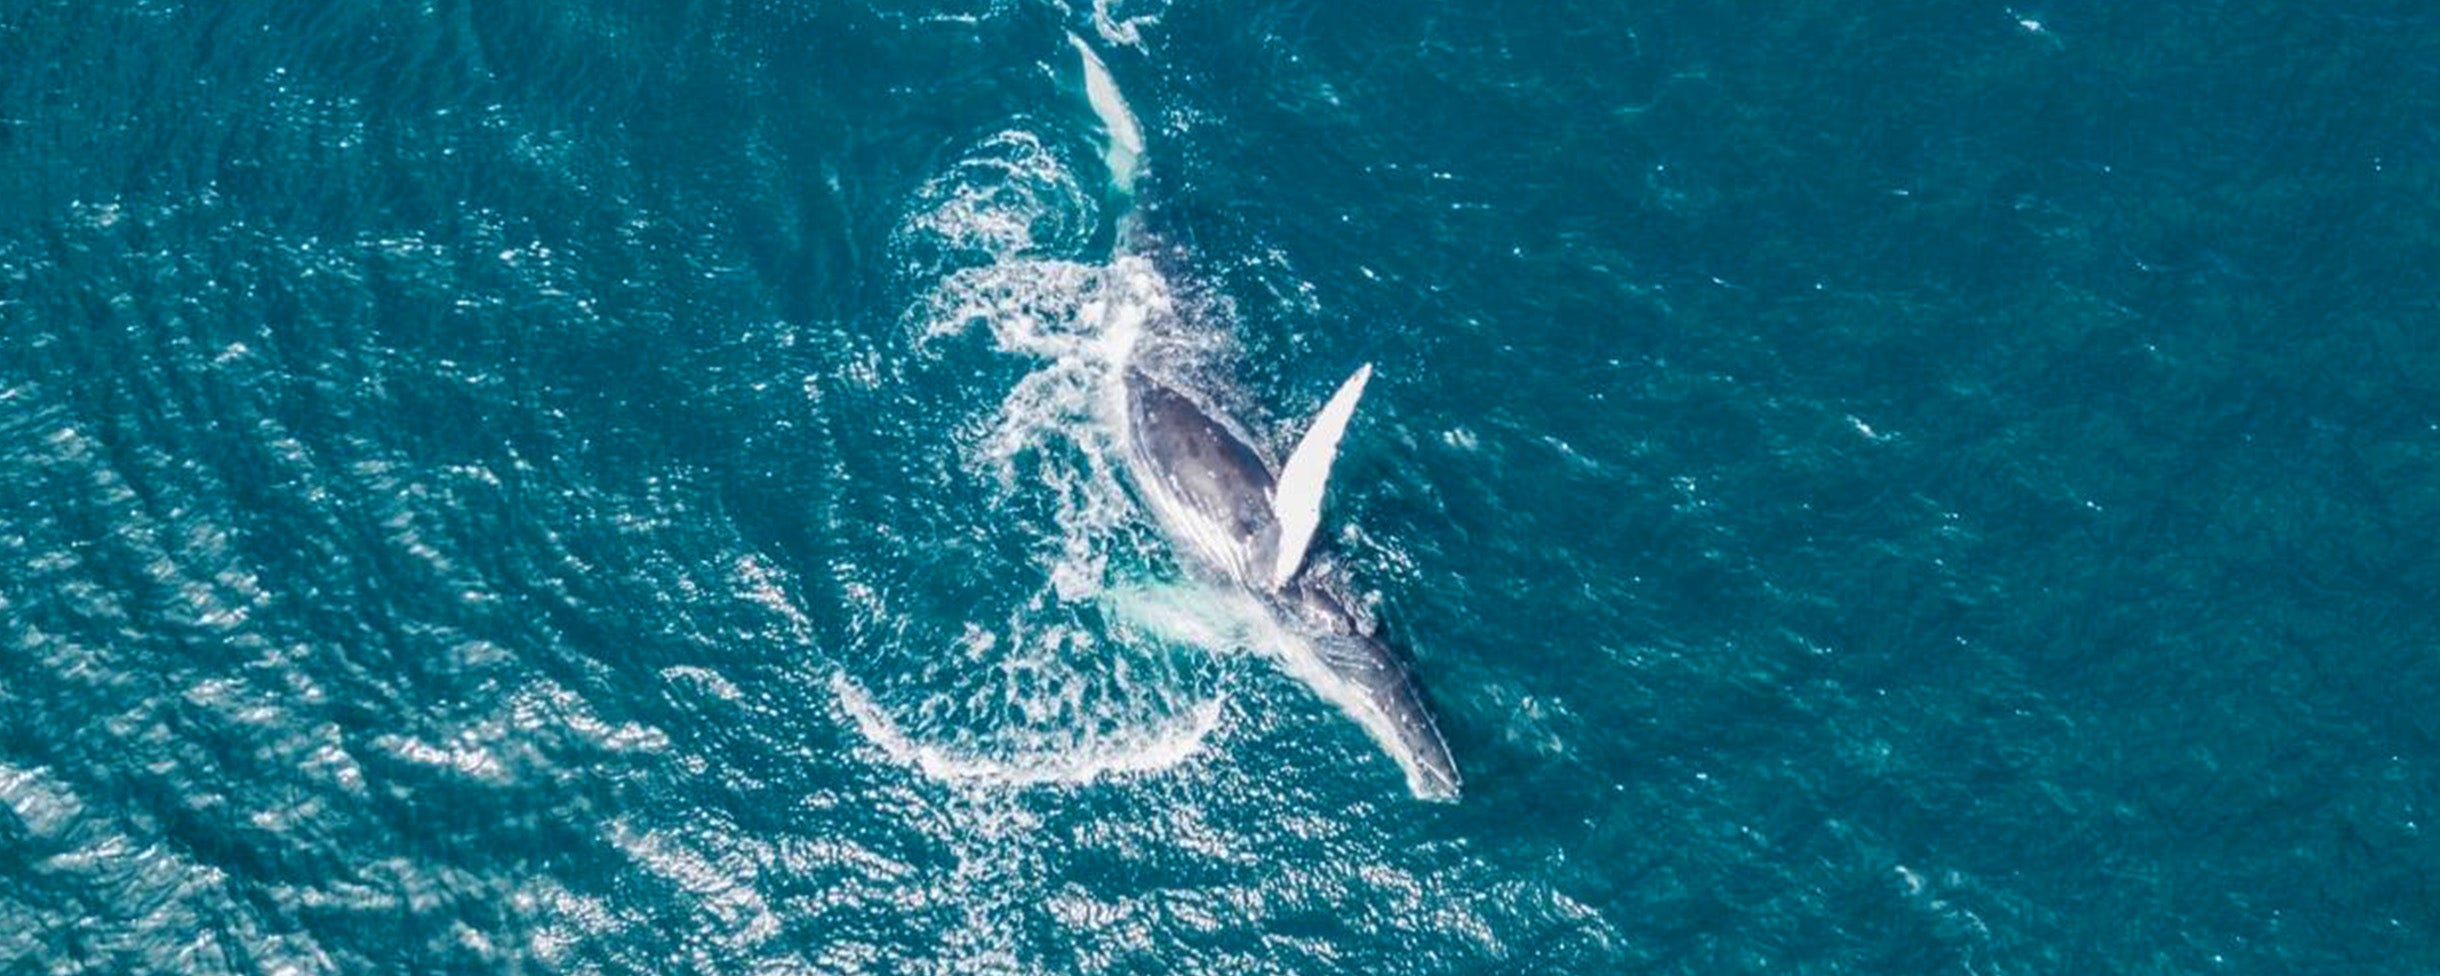 Drone shot of the Pacific Ocean whales on Whale Watching Tour with Everyday California. Whale breaching through the surface.